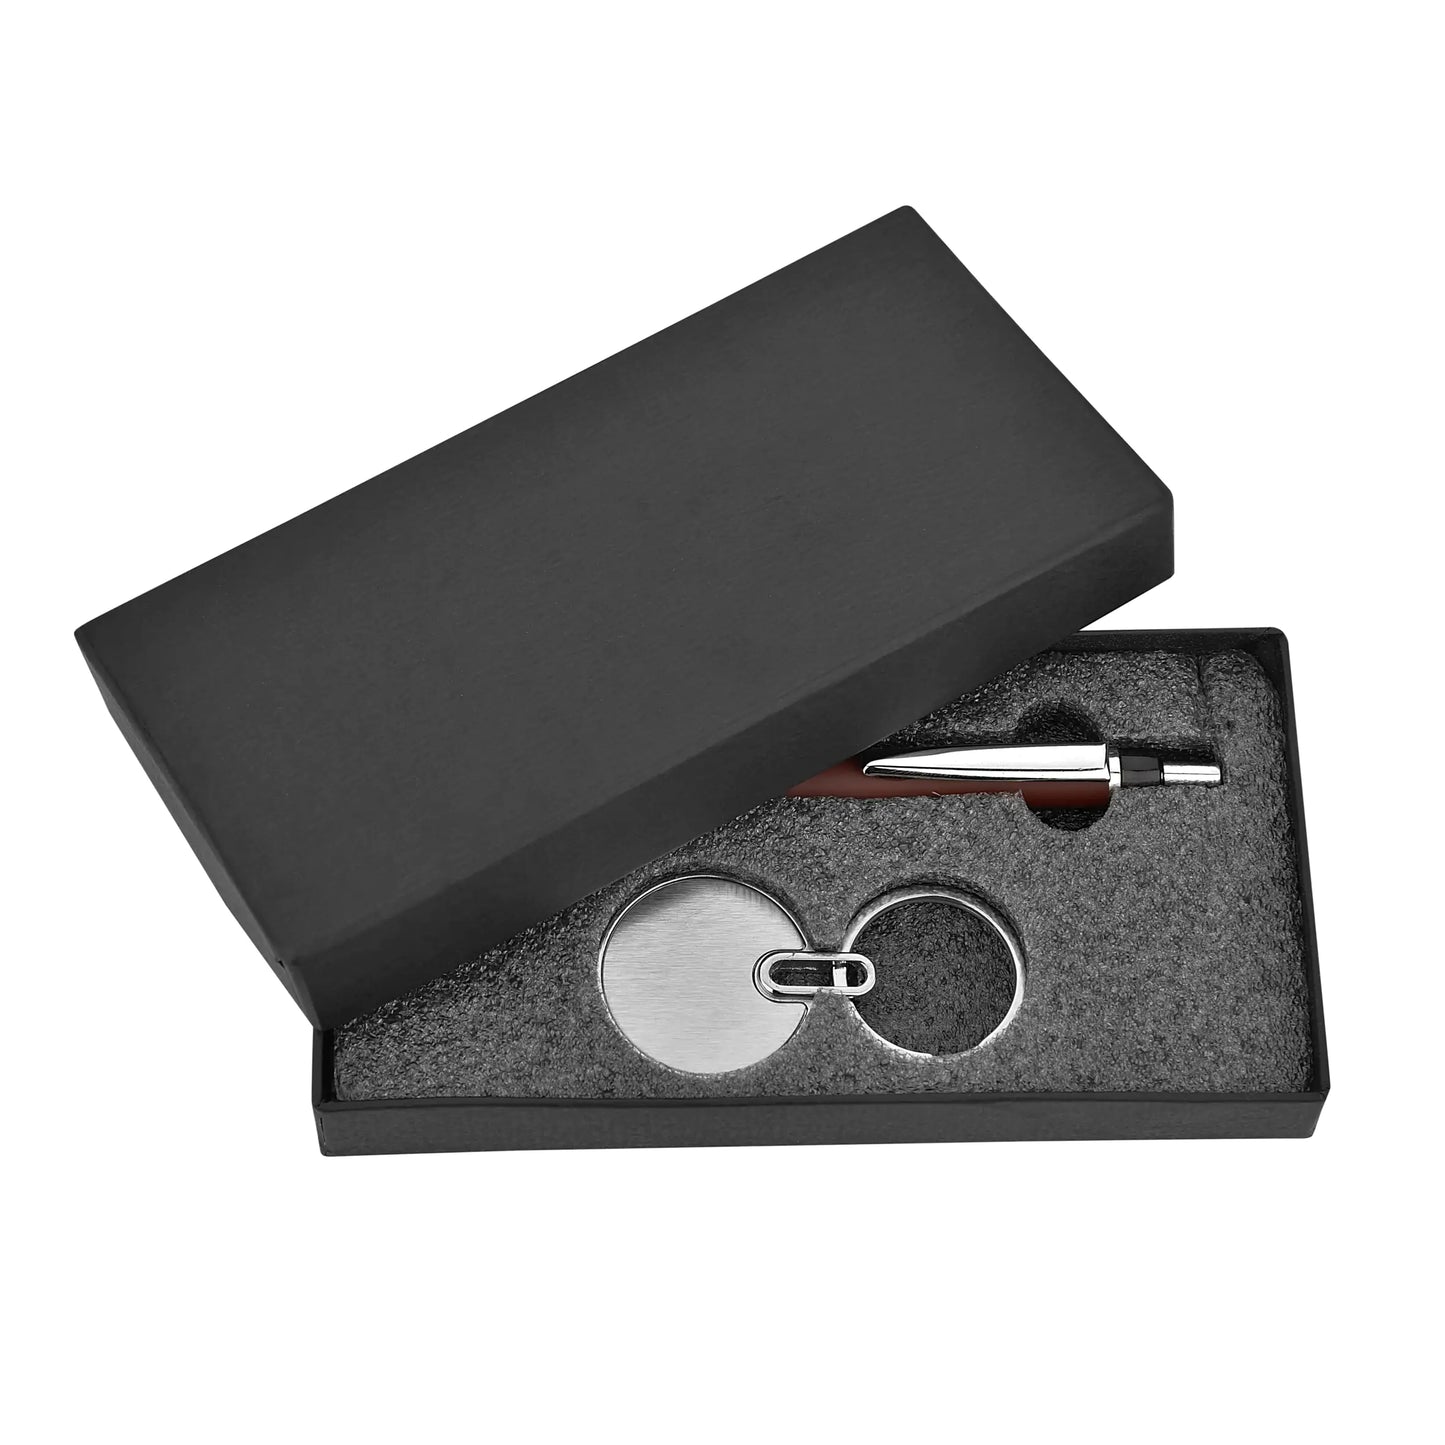 Pen and Keychain 2in1 Combo Gift Set - For Employee Joining Kit, Corporate, Client or Dealer Gifting, Promotional Freebie JKSR101